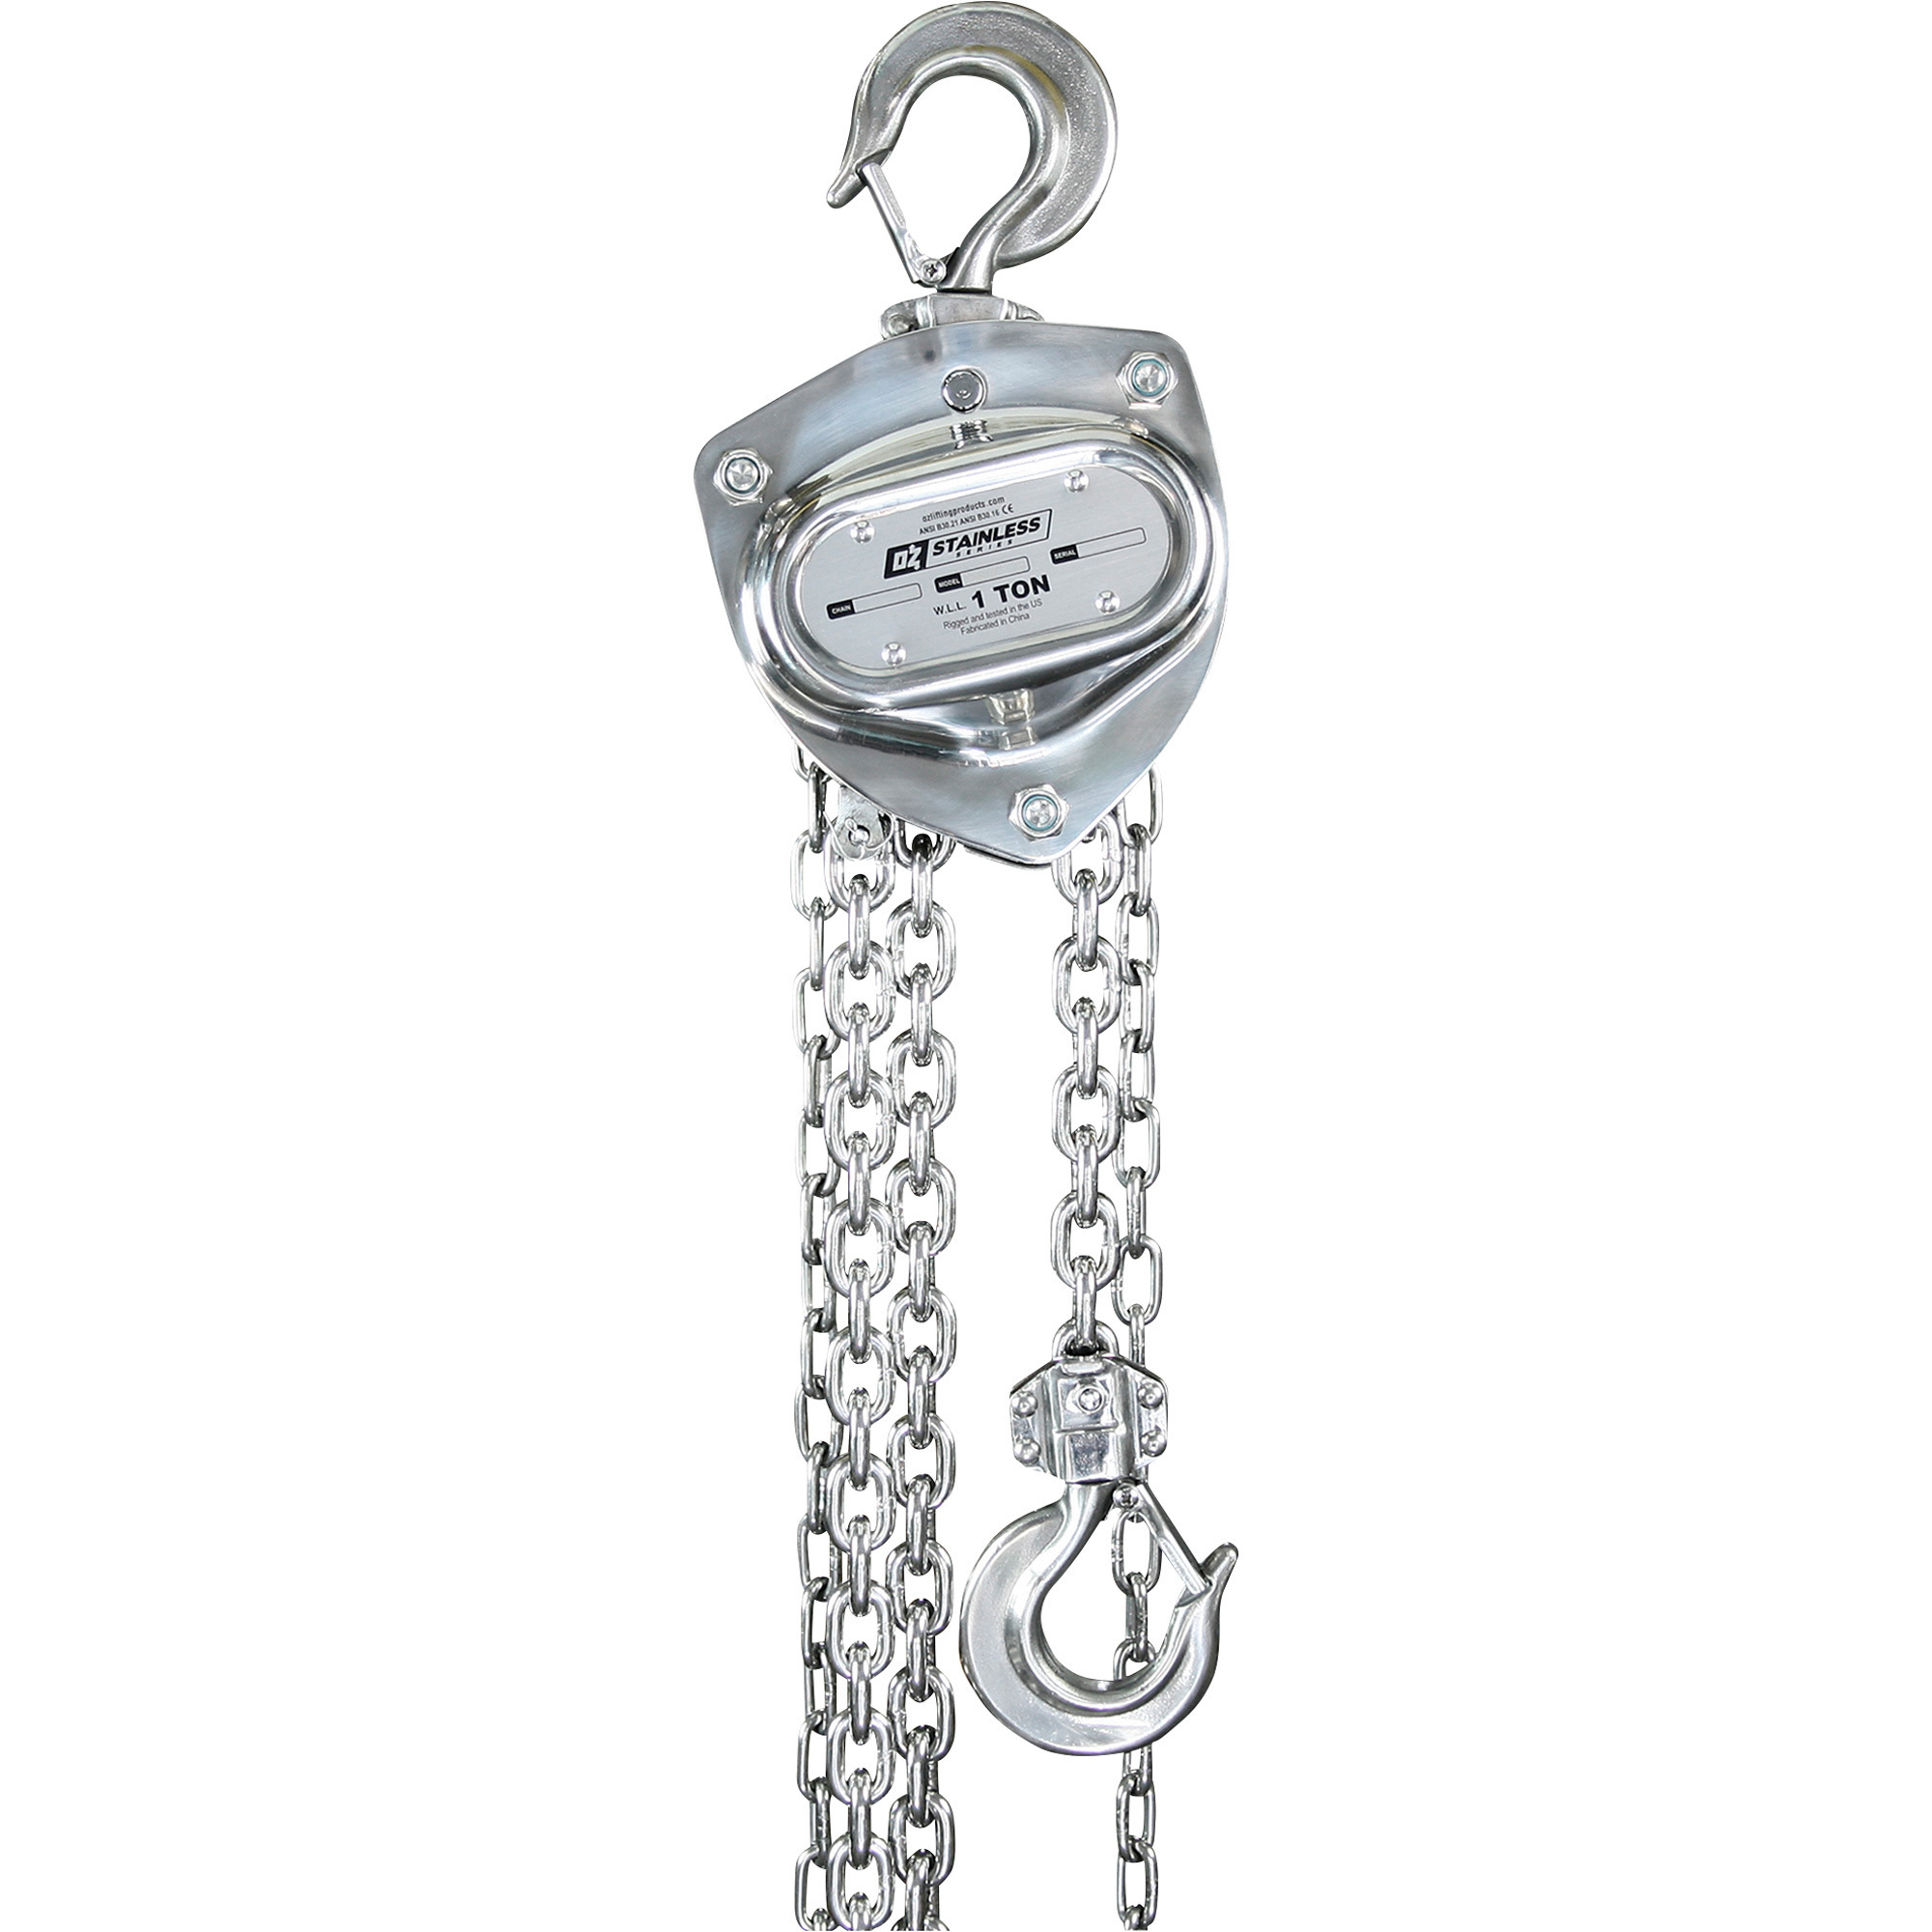 OZ Lifting Products Stainless Steel Manual Chain Hoist â 1-Ton Capacity, 10ft. Lift Height, Model OZSS010-10CH